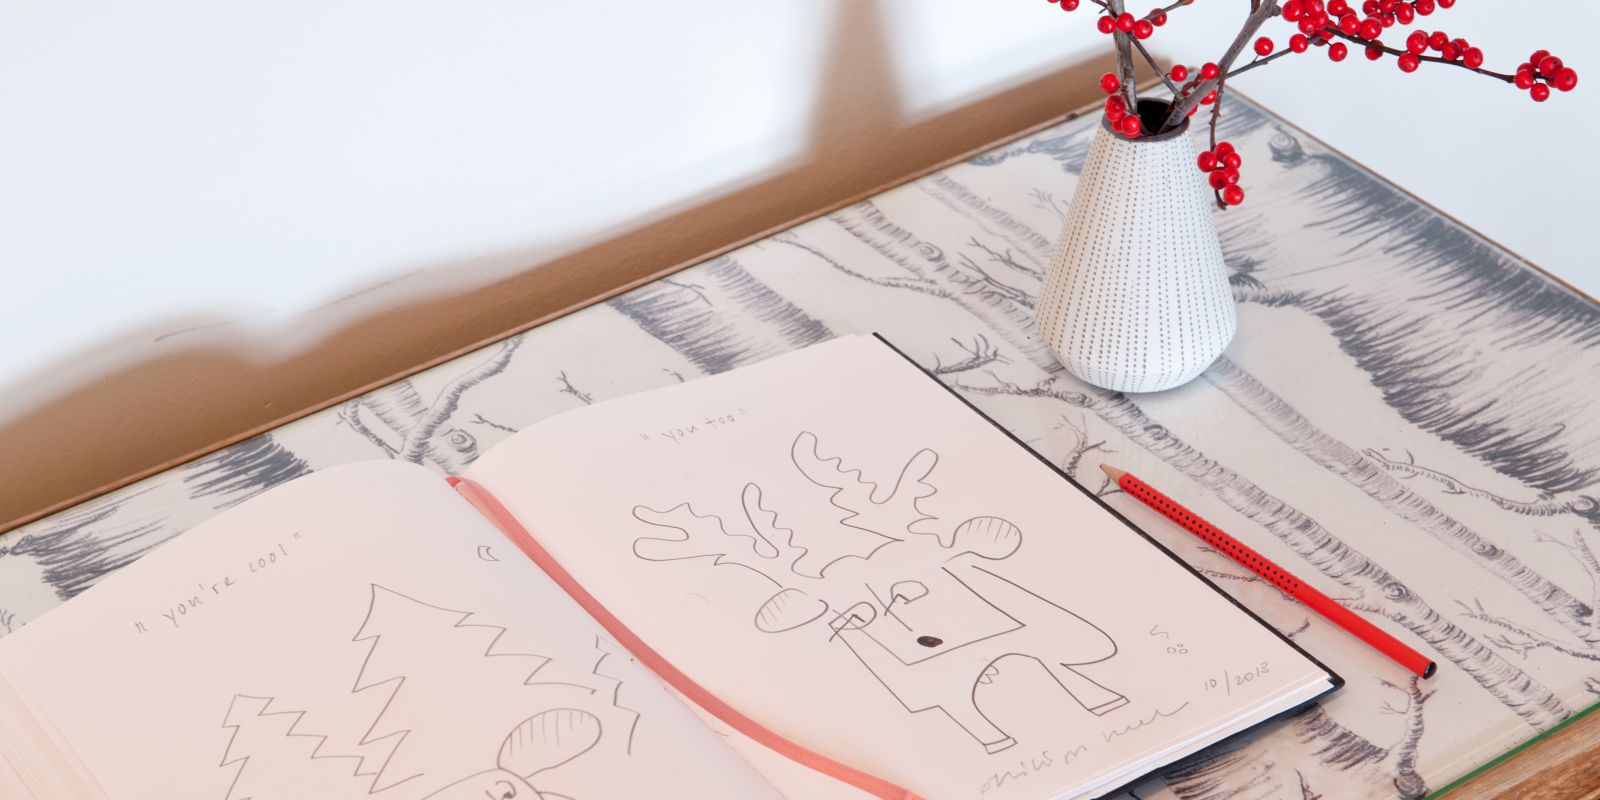 Creative hotel guest book with drawing about a stay, culture travel and art, little details